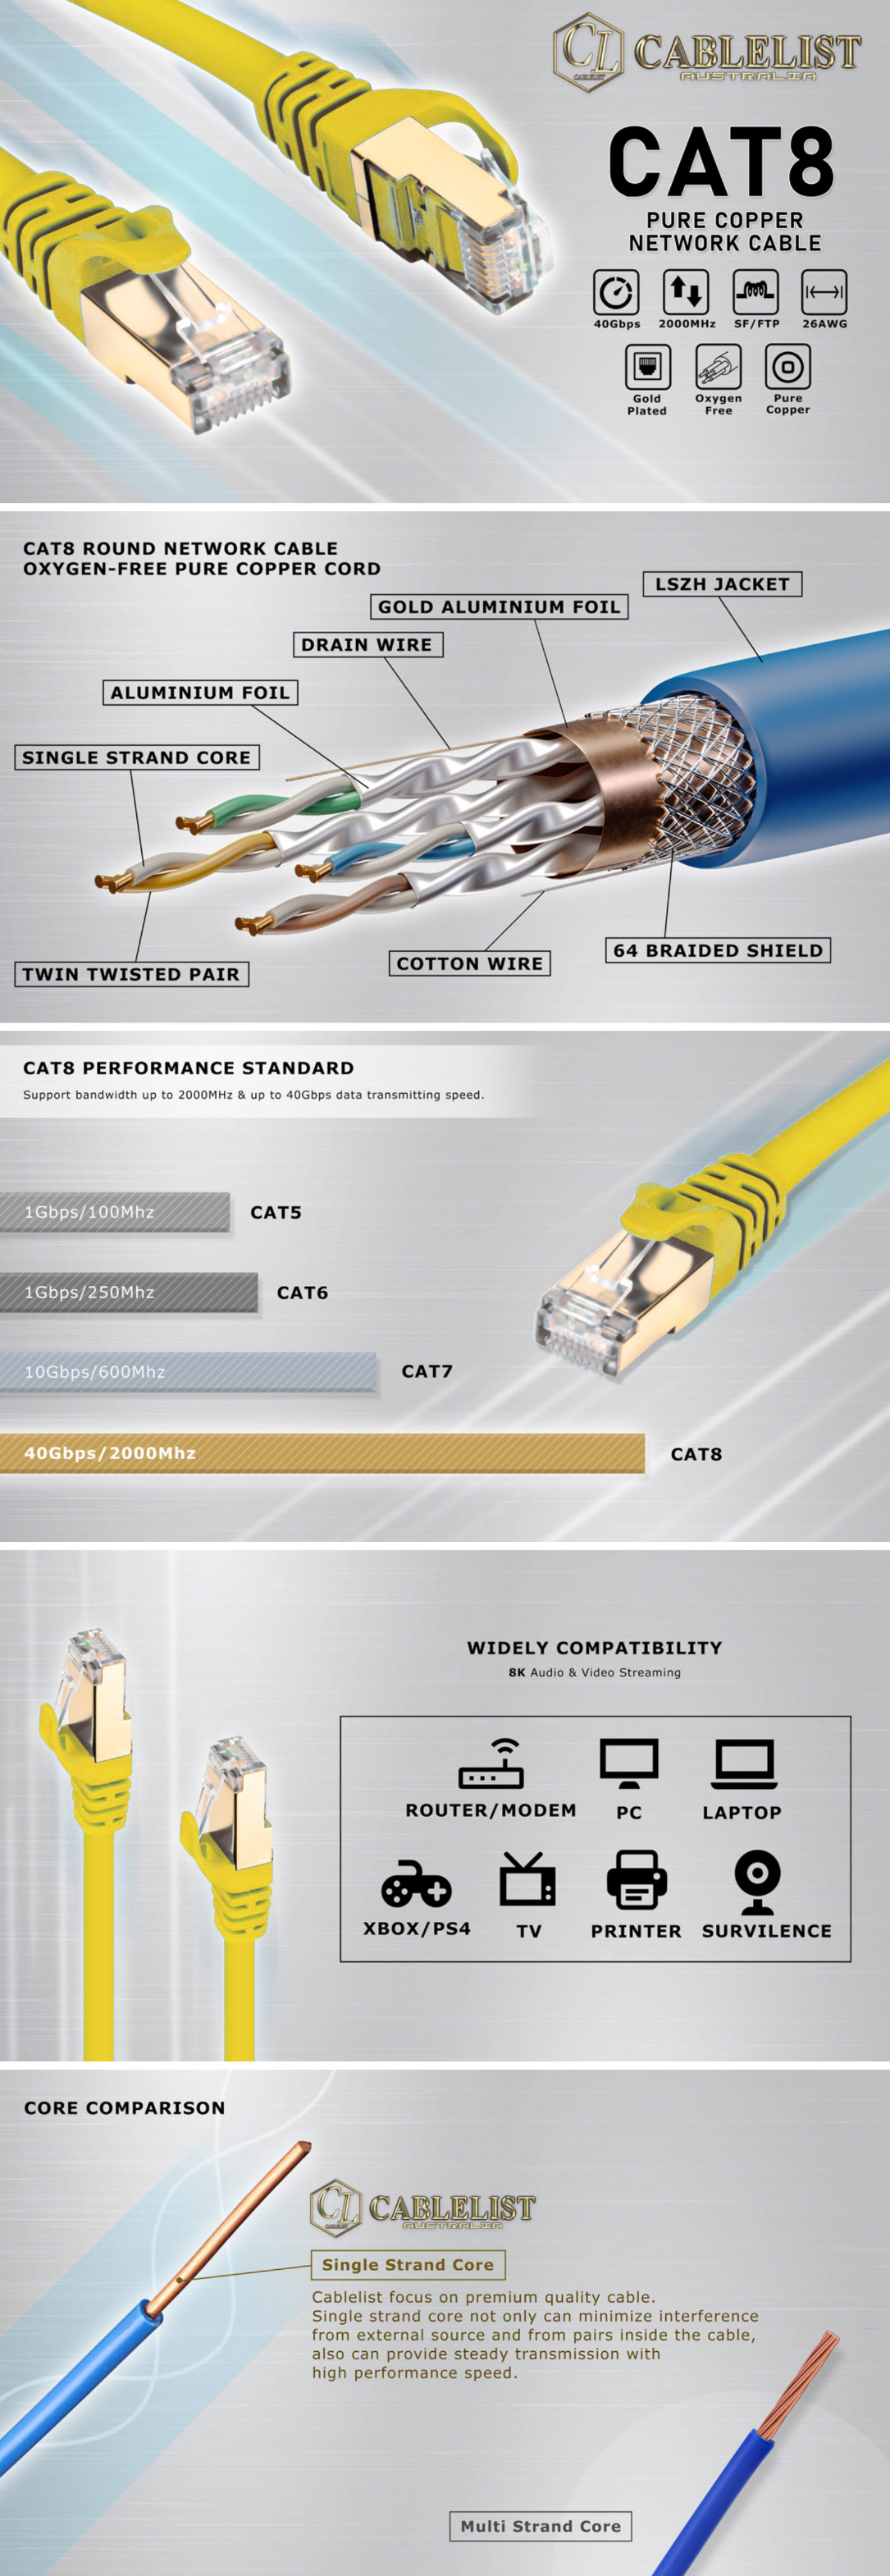 Network-Cables-Cablelist-CAT8-SF-FTP-RJ45-Ethernet-Cable-1m-Yellow-2